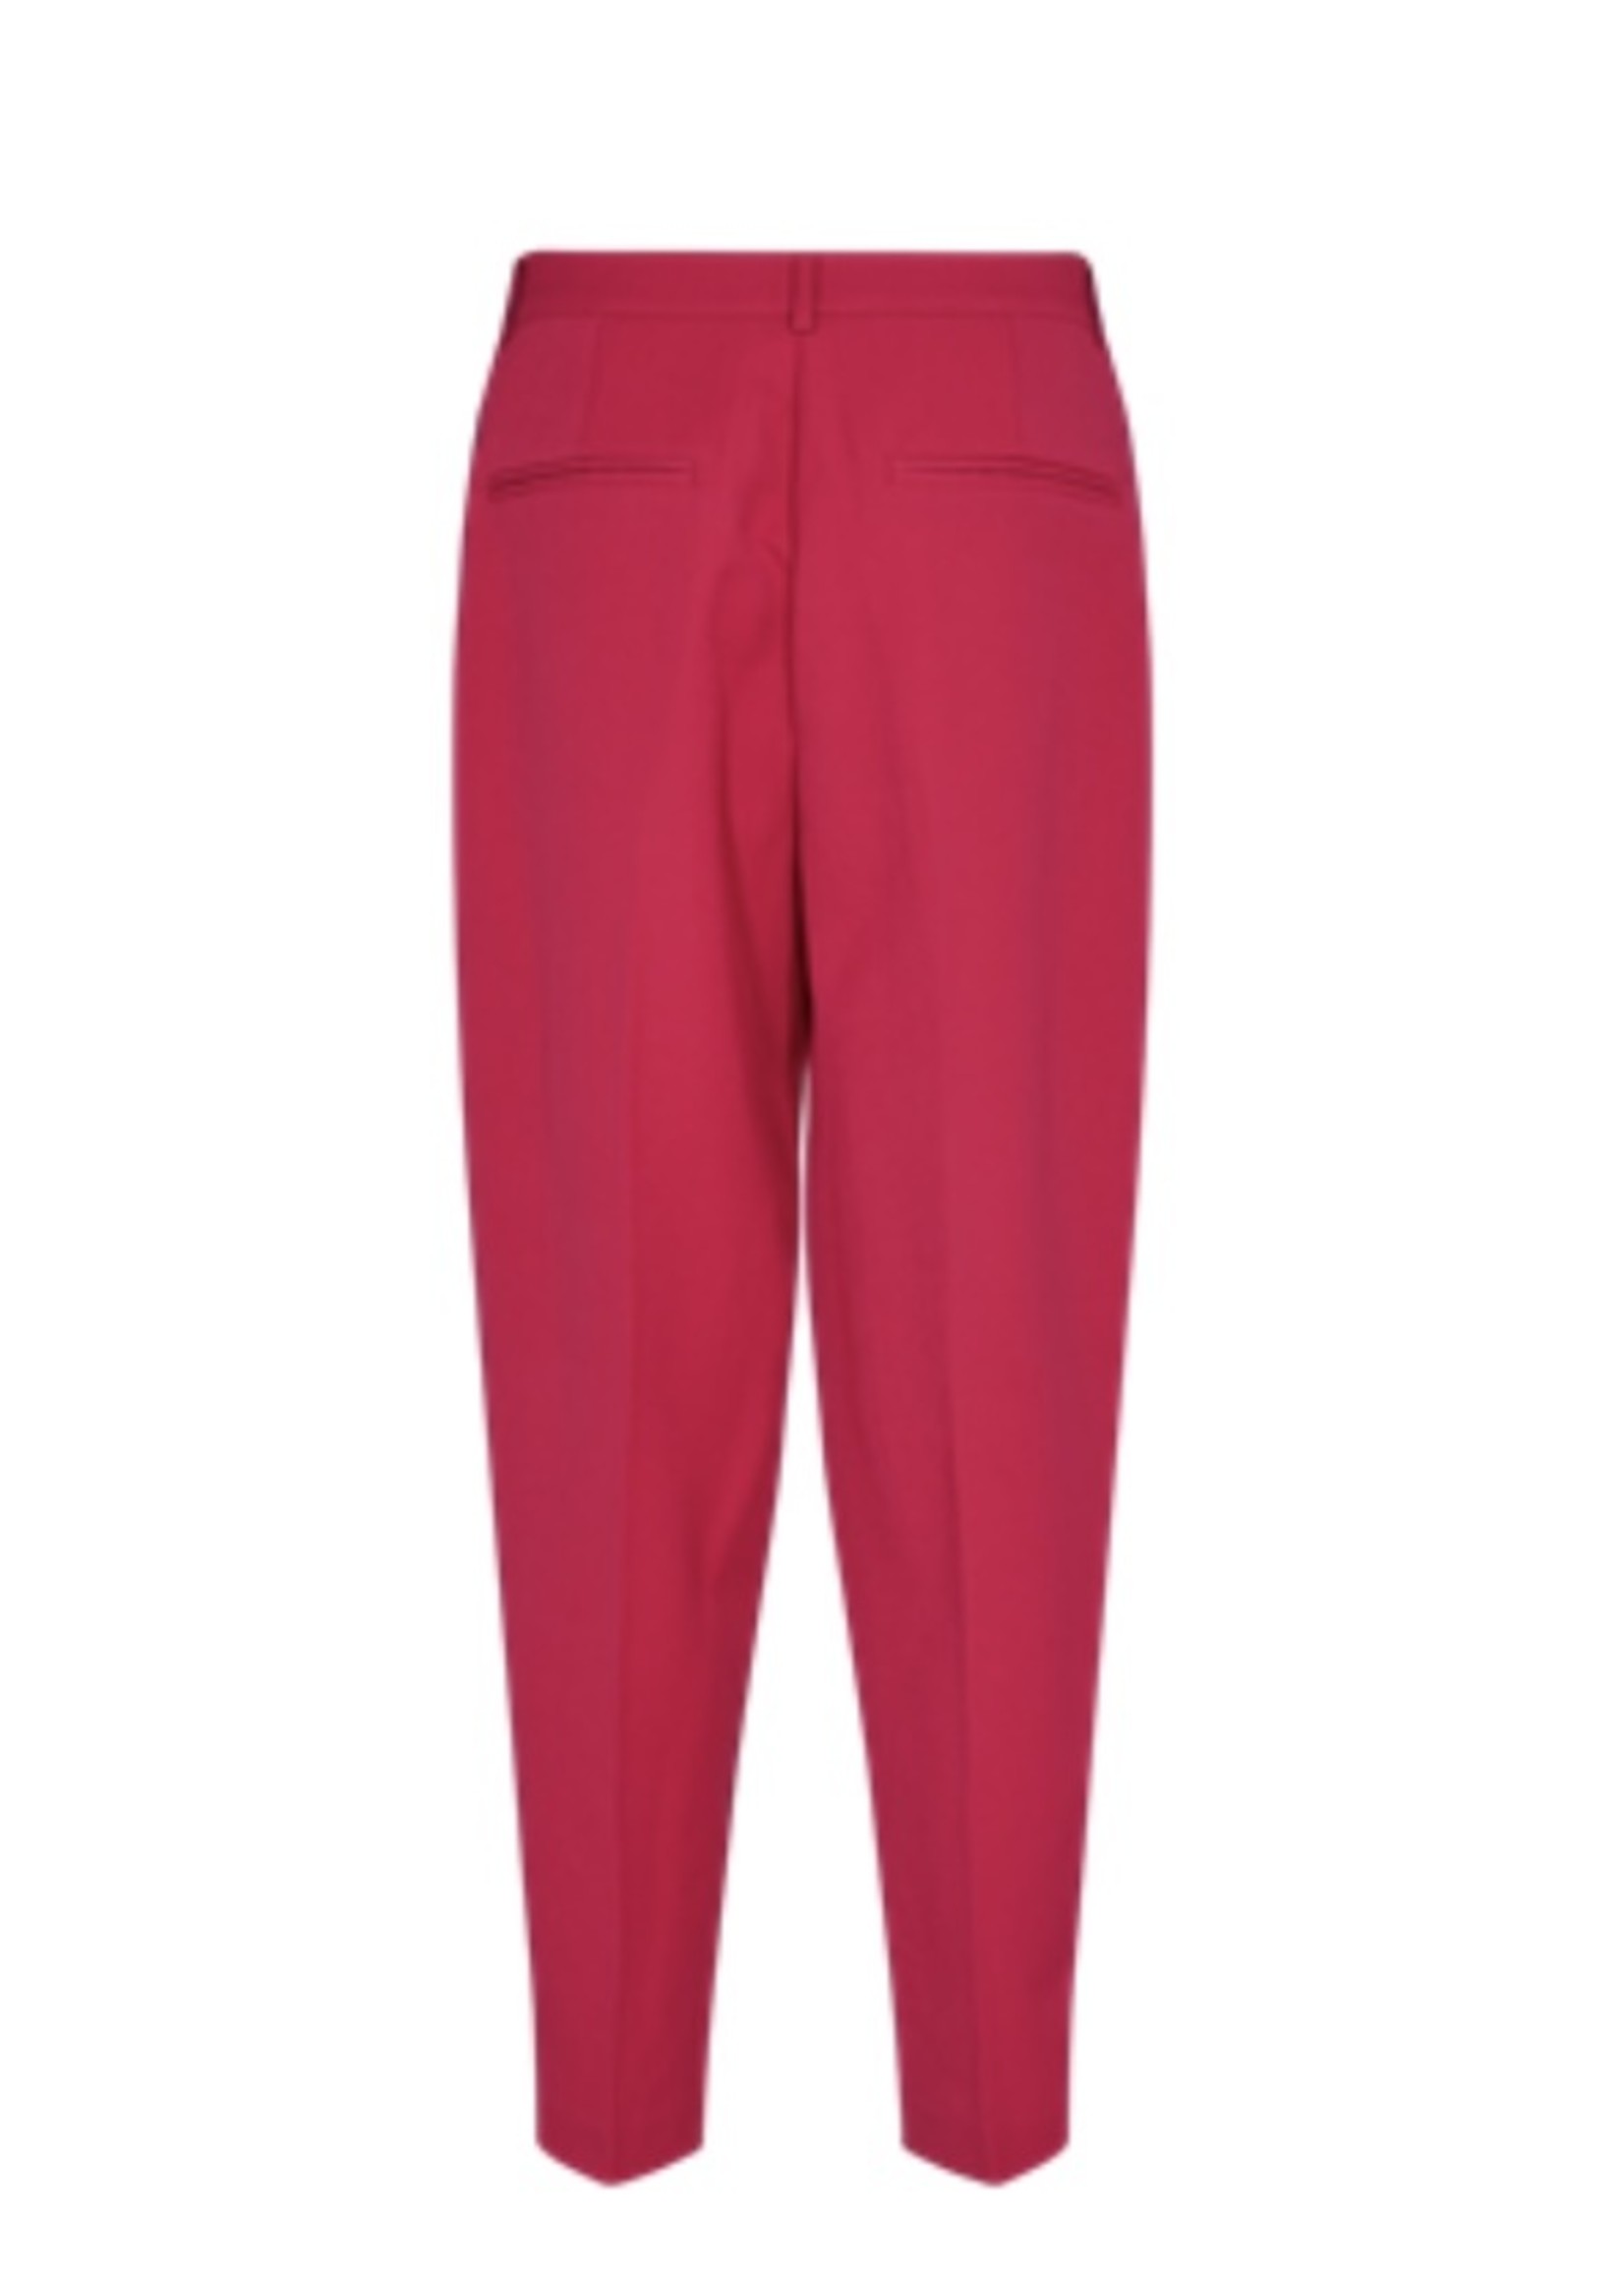 Freequent Kitte - Pant - Cerise